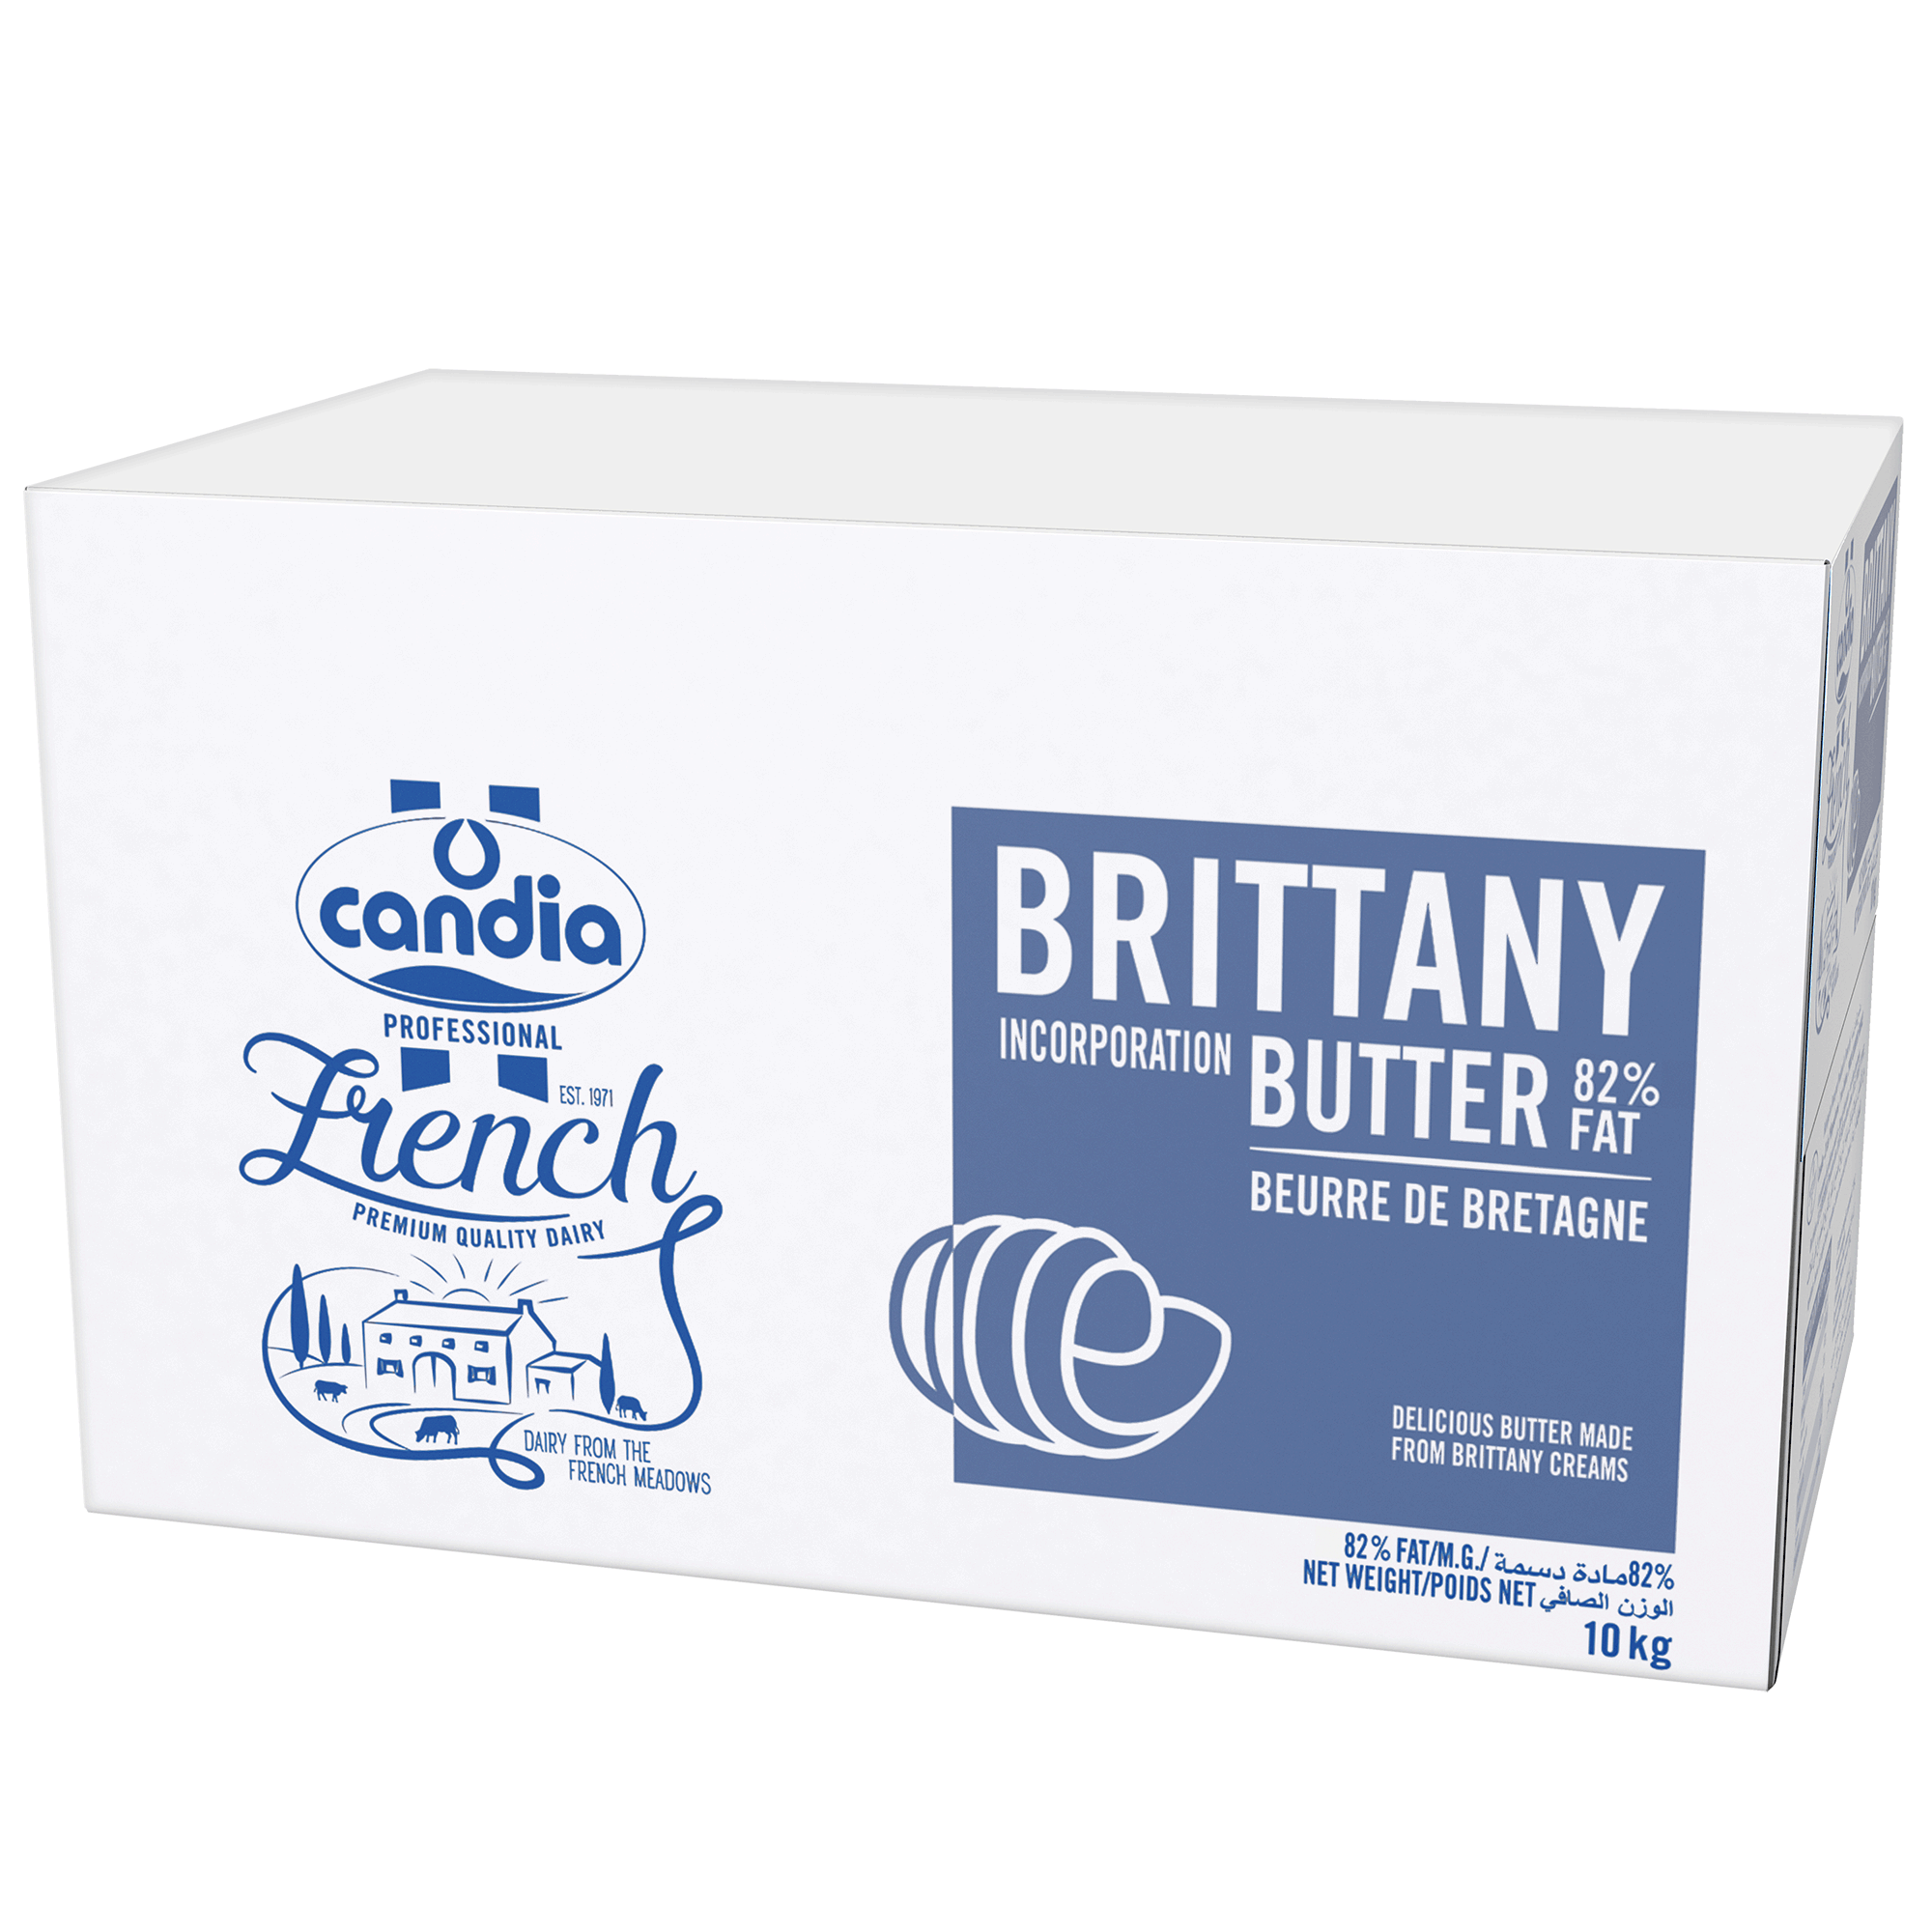 BRITTANY INCORPORATION BUTTER